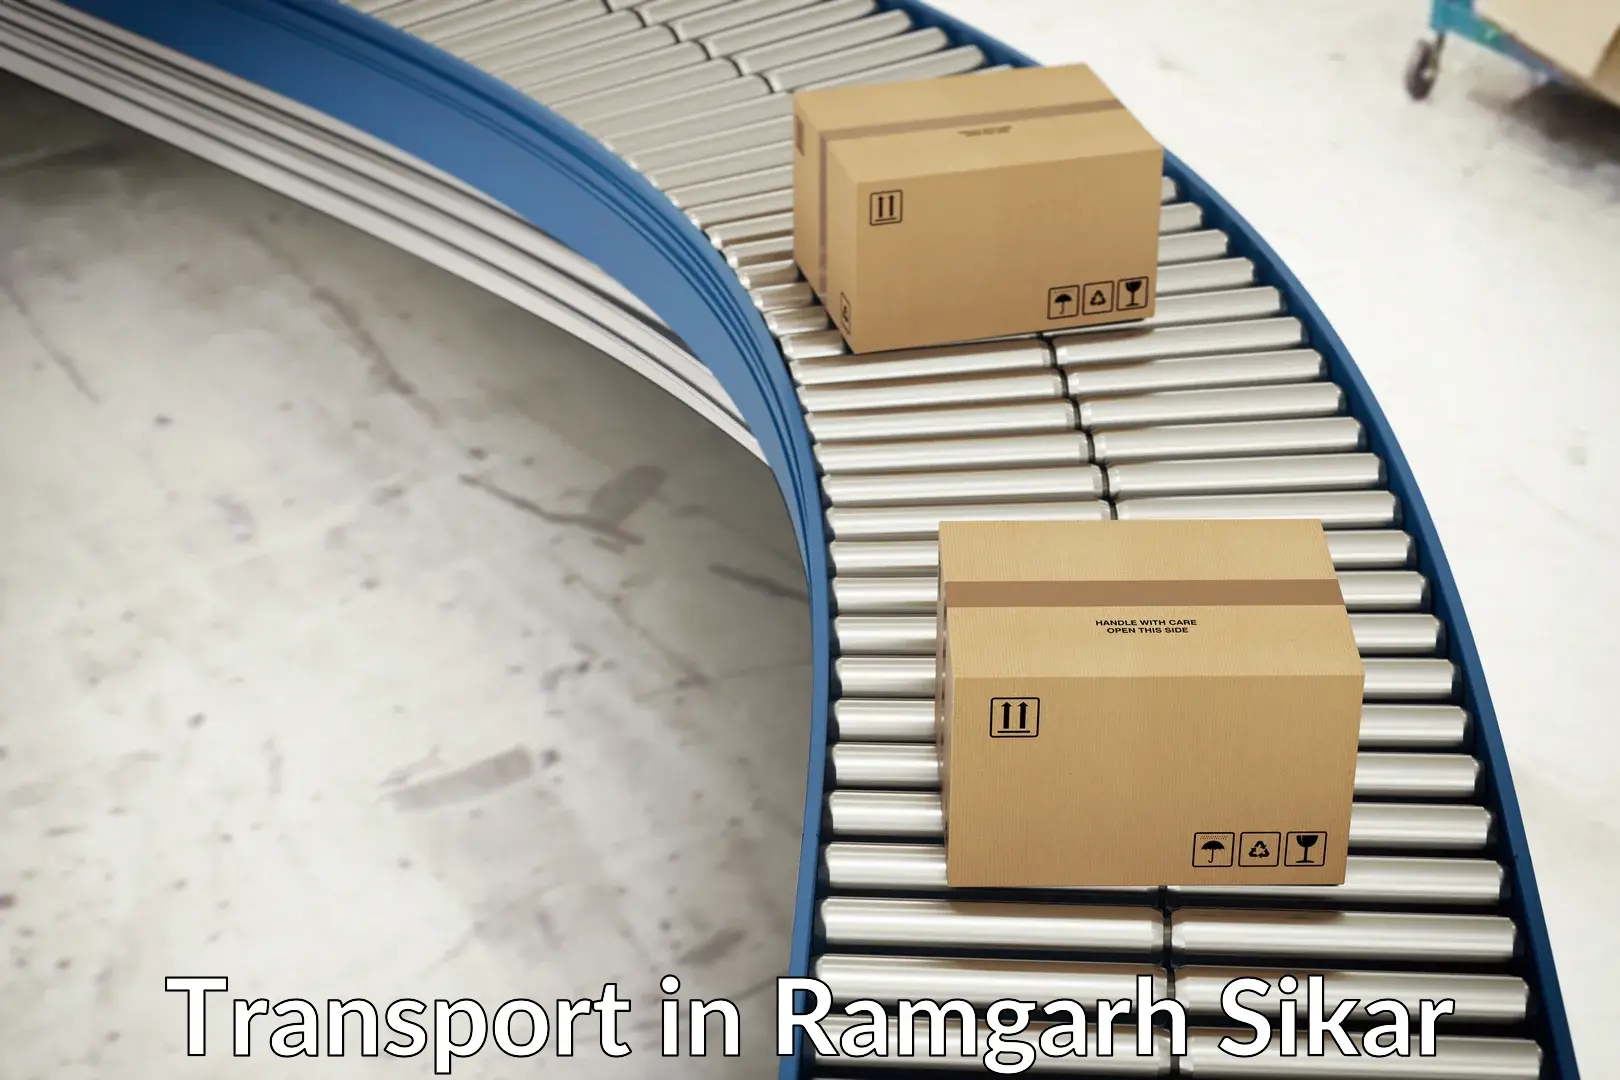 Road transport services in Ramgarh Sikar